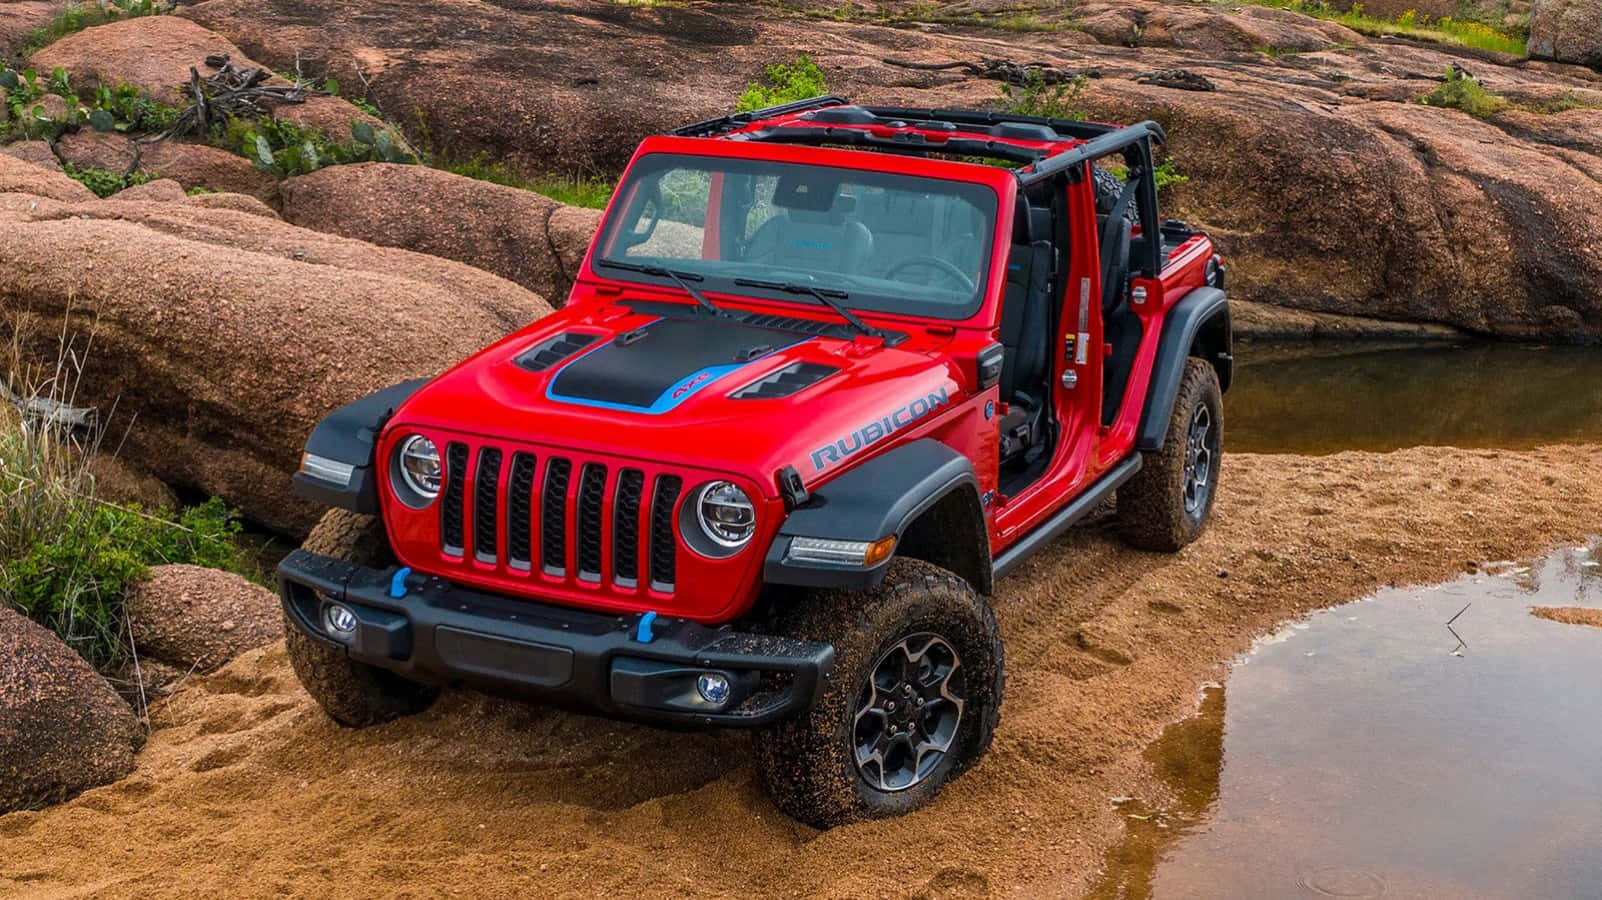 This Rugged Jeep Wrangler Adventure-Ready Anywhere